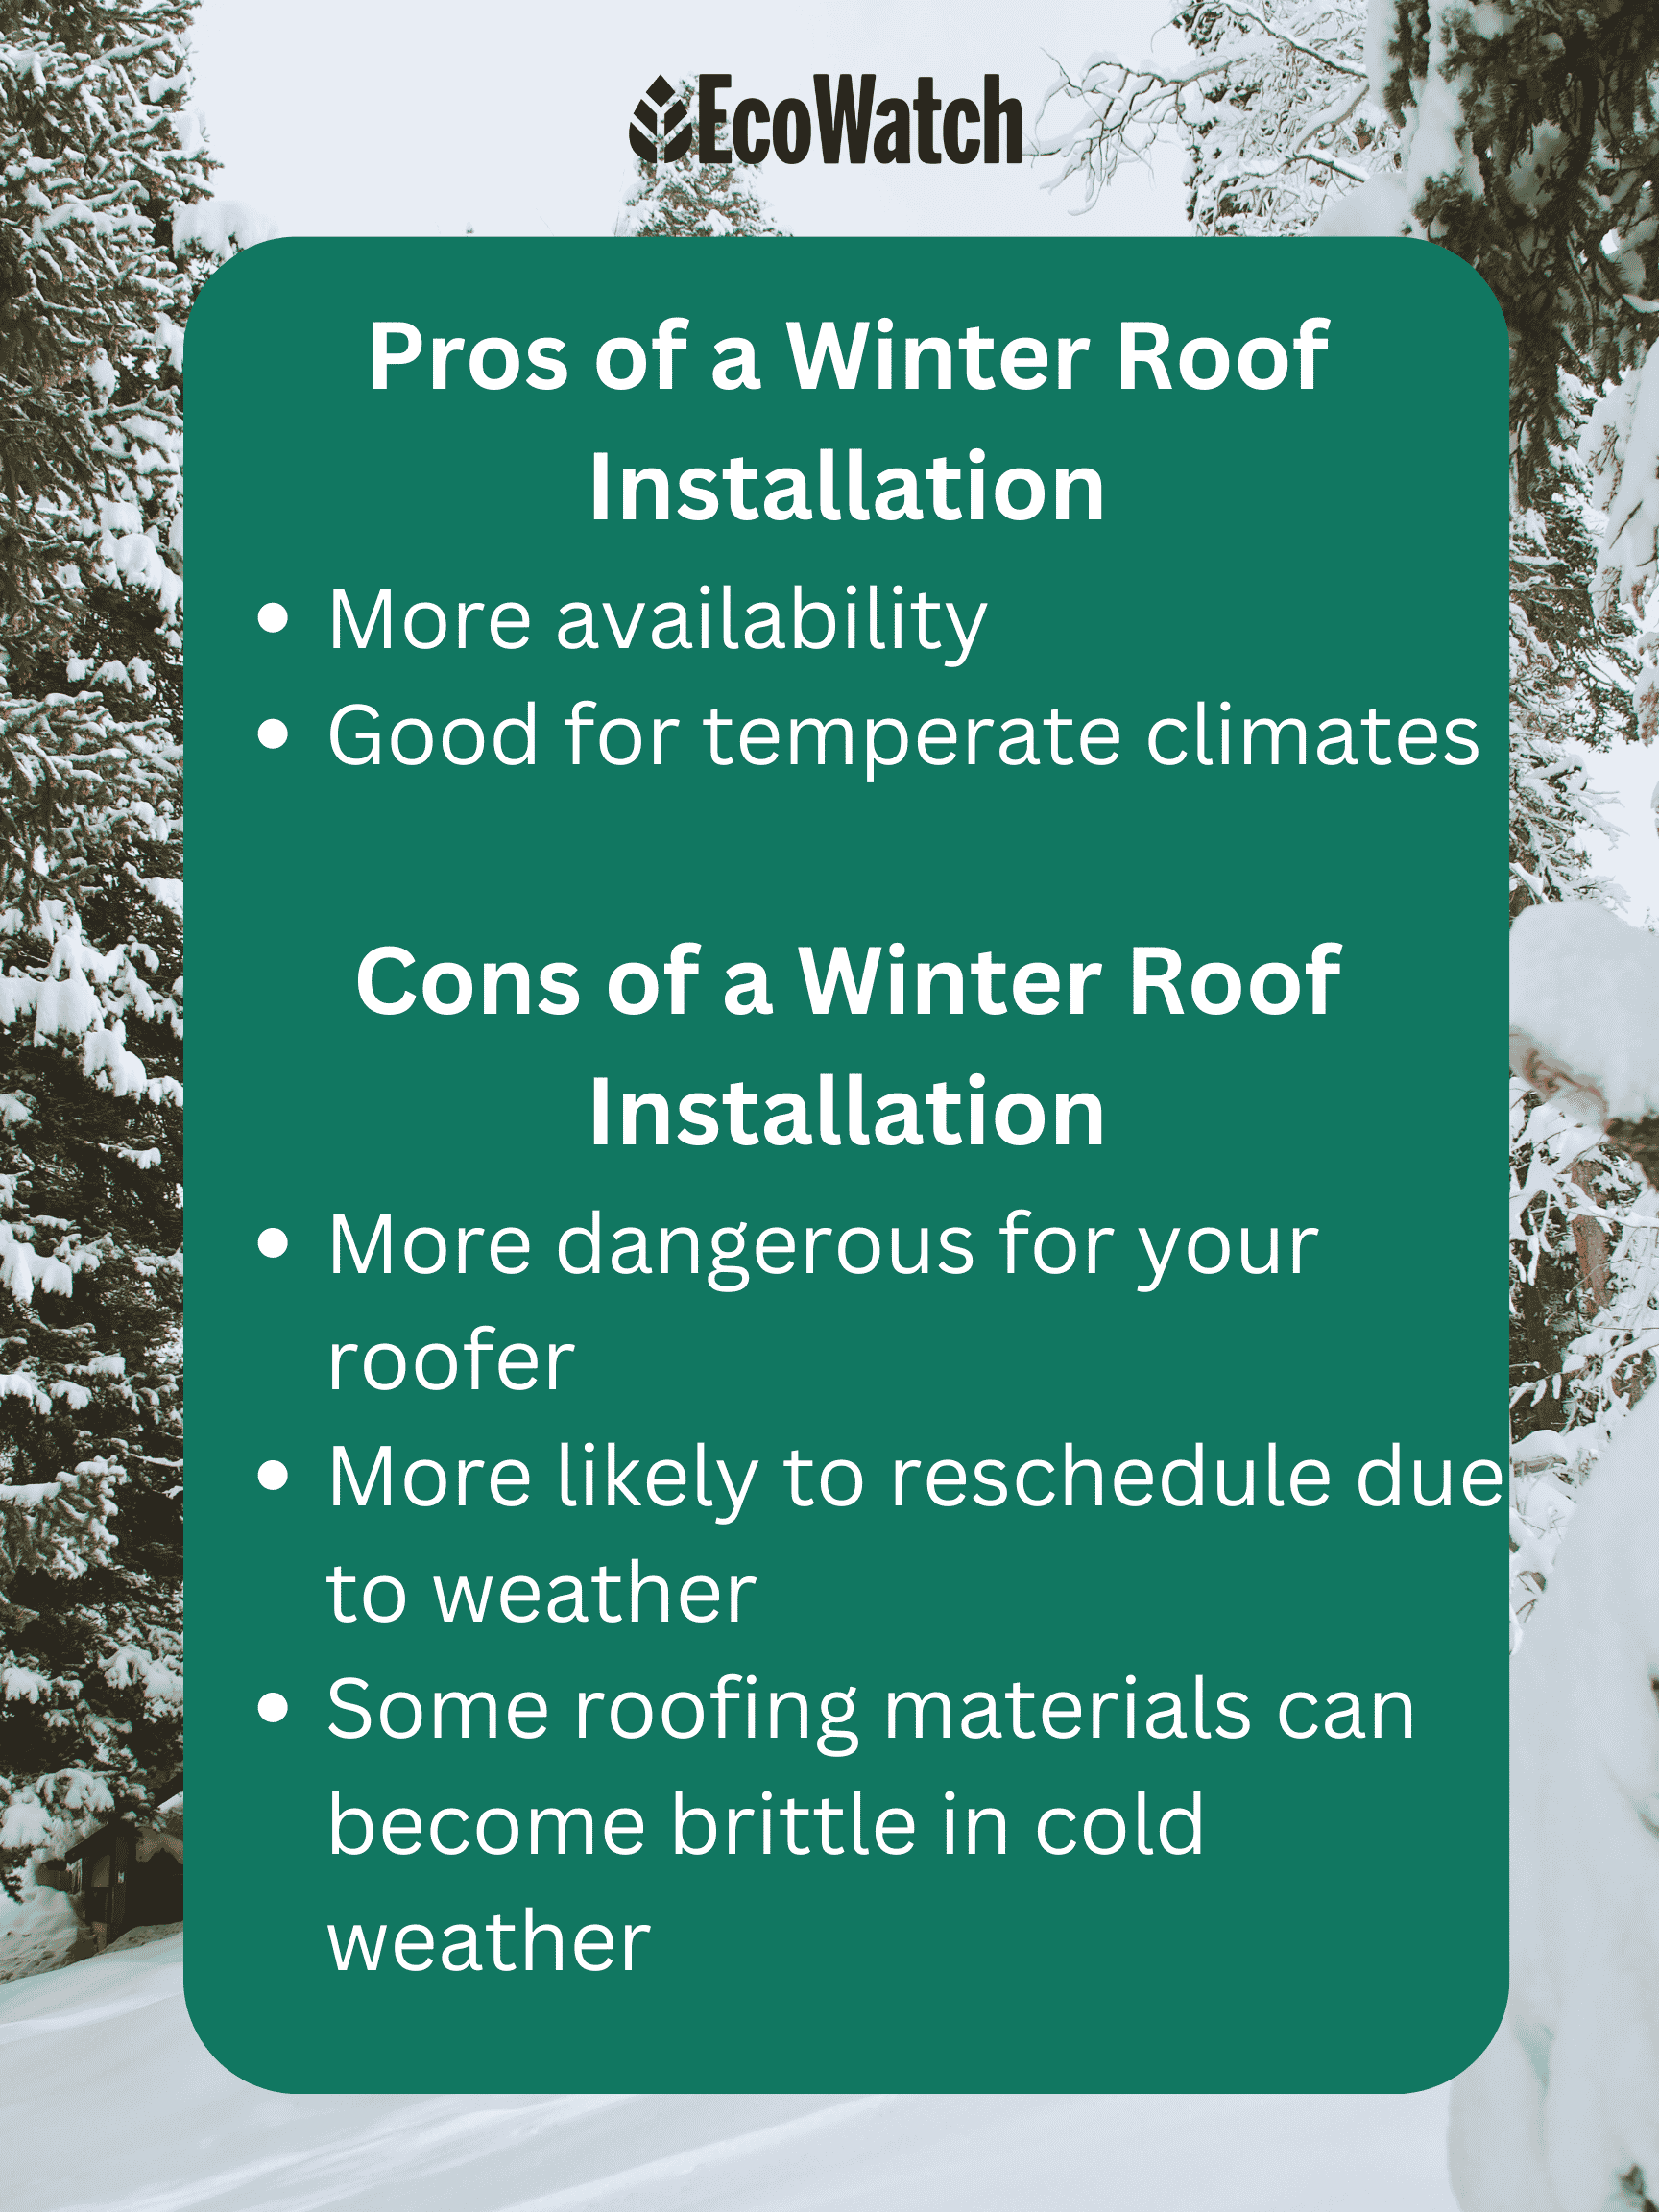 Pros and cons of a winter roof installation